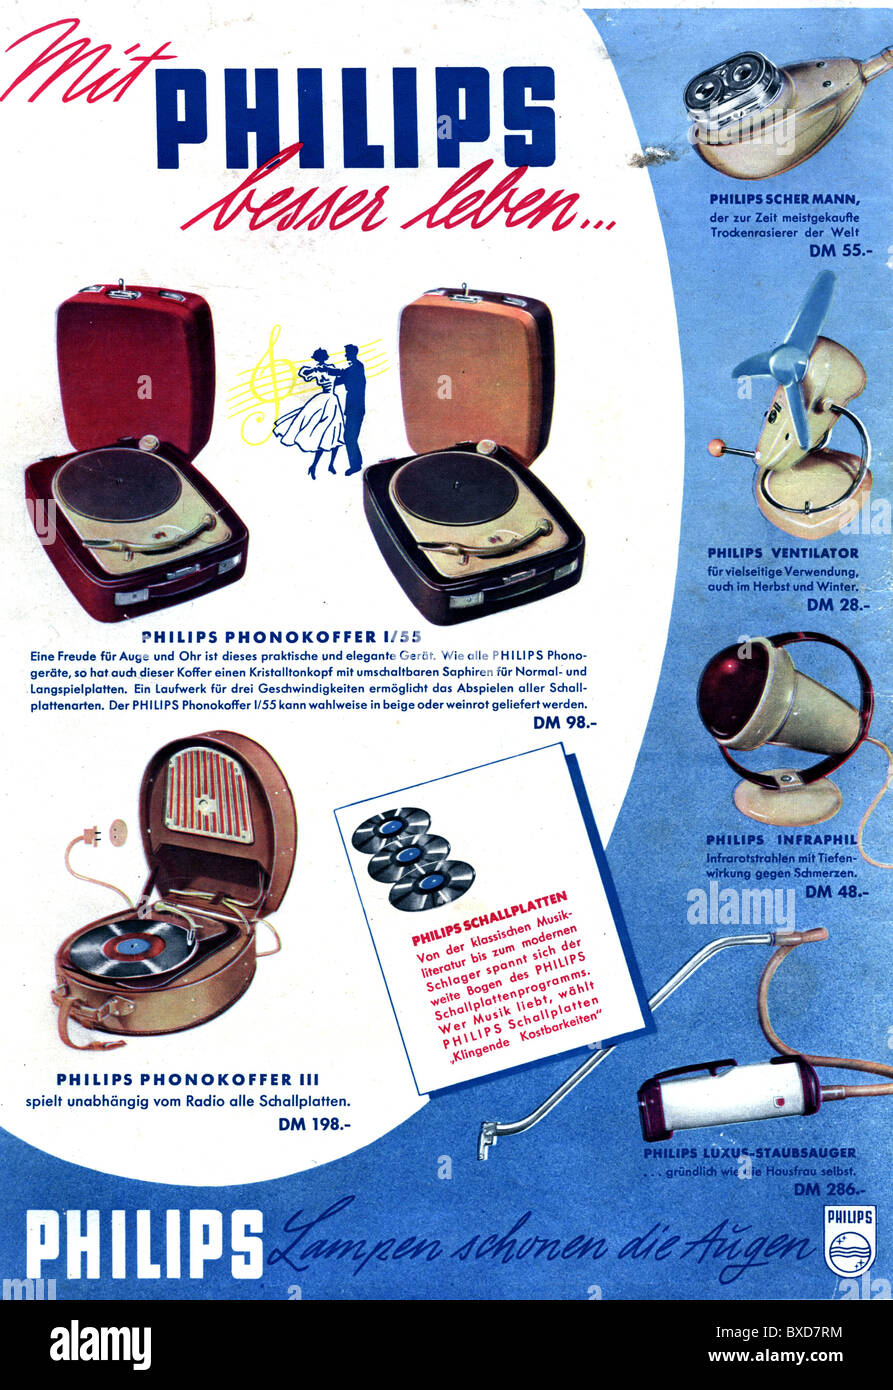 advertising, radio set, Philips, advertisement in magazine, 1955, historic,  historical, press/media, Germany, 1950s, 50s, 20th century, page, brand,  technical products, product, technics, electrical, Phonokoffer I/55, III,  phono case, infrared lamp ...